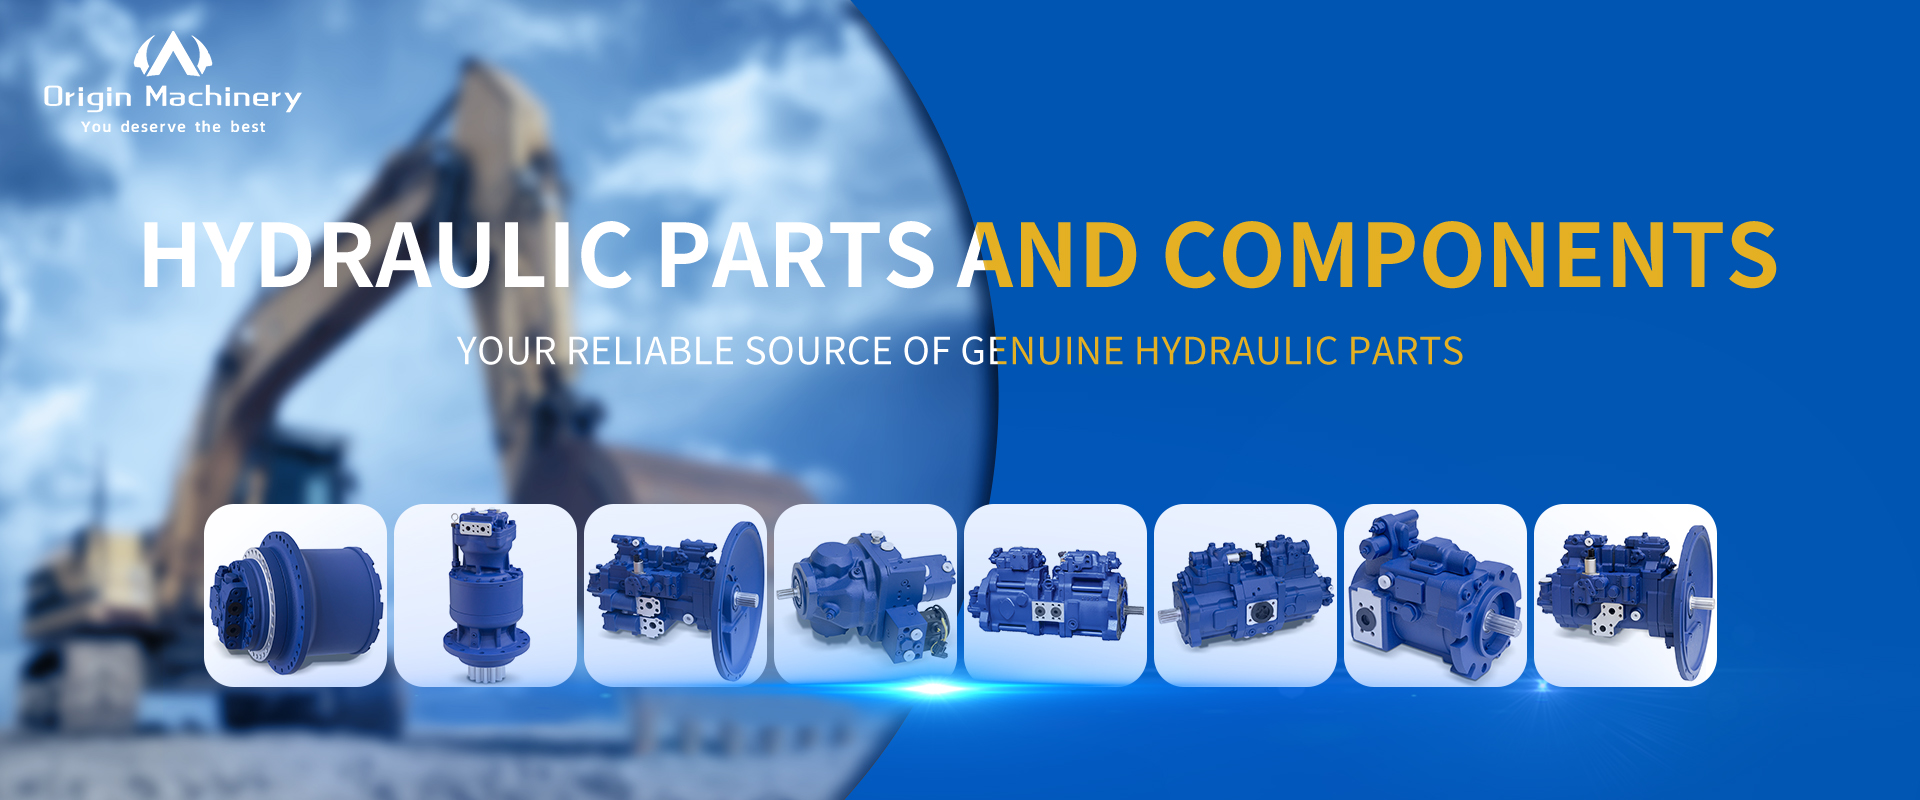 hydraulic Parts and components